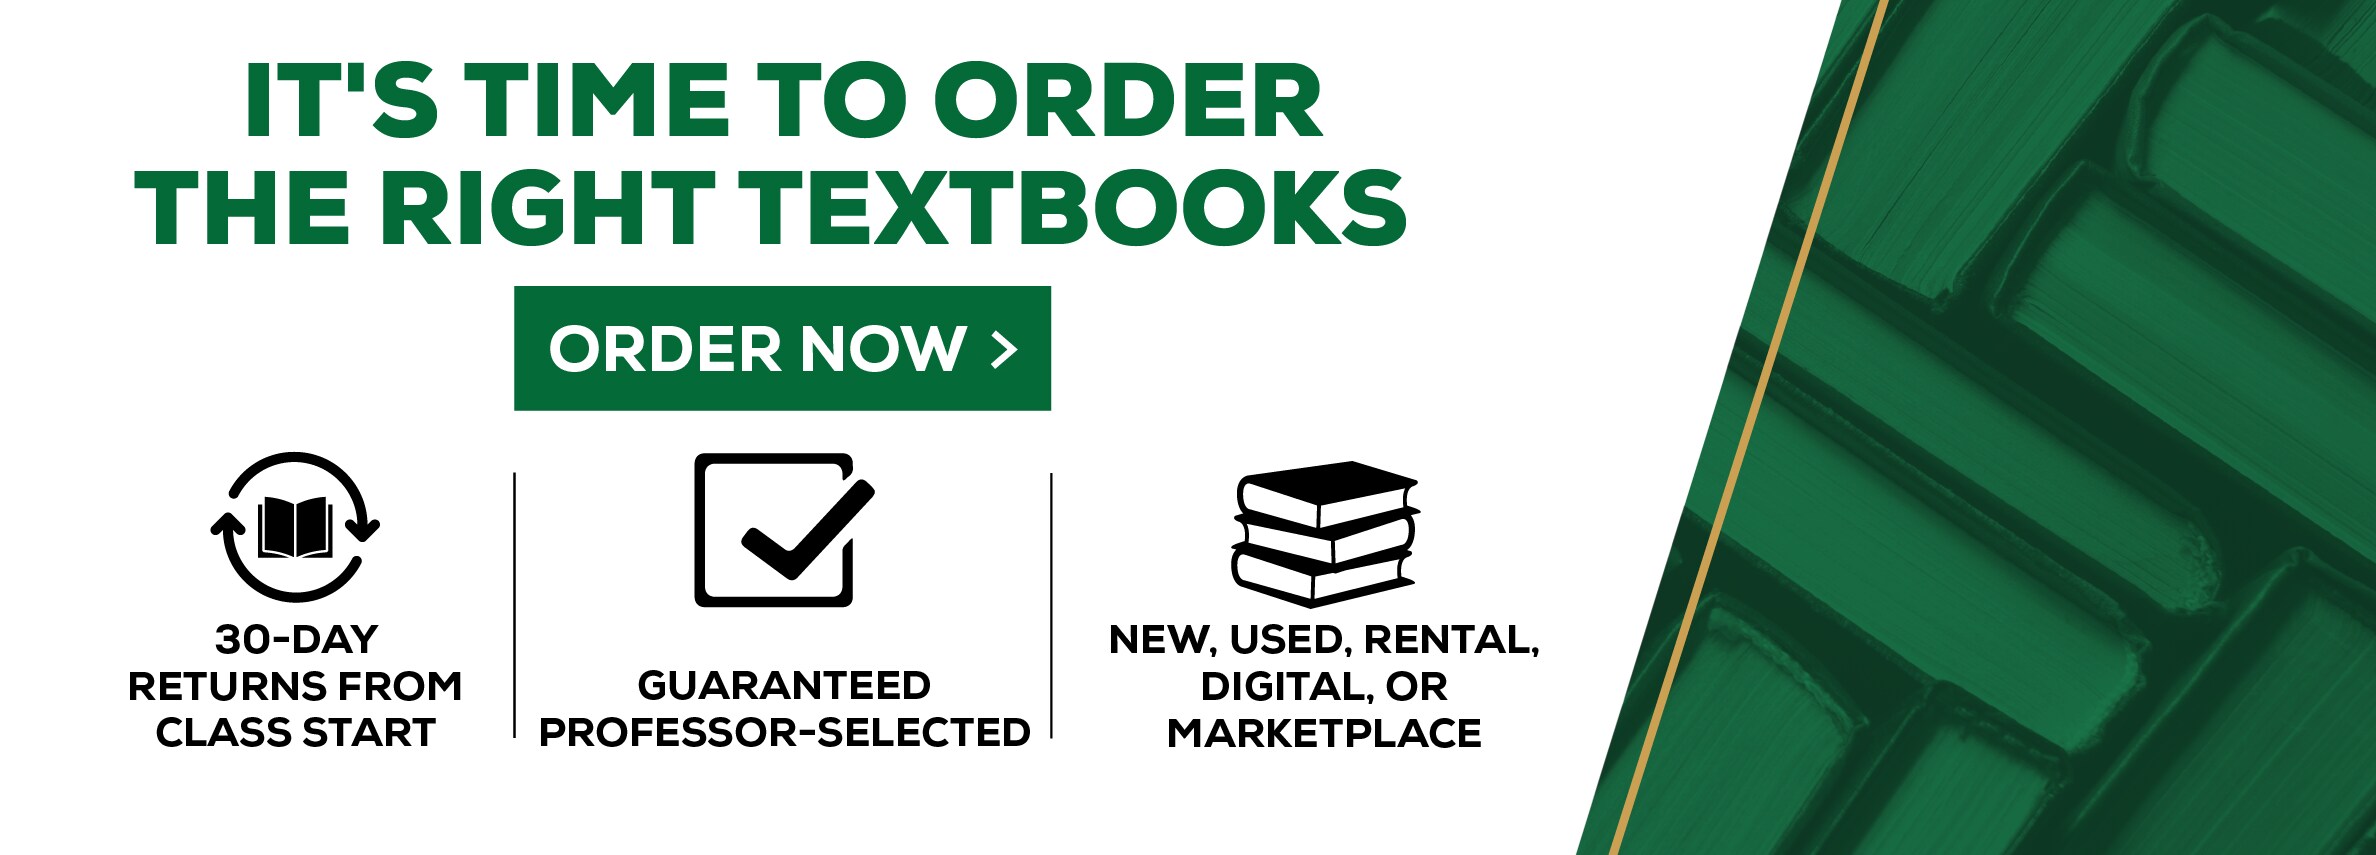 IT'S TIME TO ORDER THE RIGHT TEXTBOOKS ORDER NOW > 30-DAY RETURNS FROM CLASS START 1 GUARANTEED PROFESSOR-SELECTED NEW, USED, RENTAL DIGITAL, OR MARKETPLACE